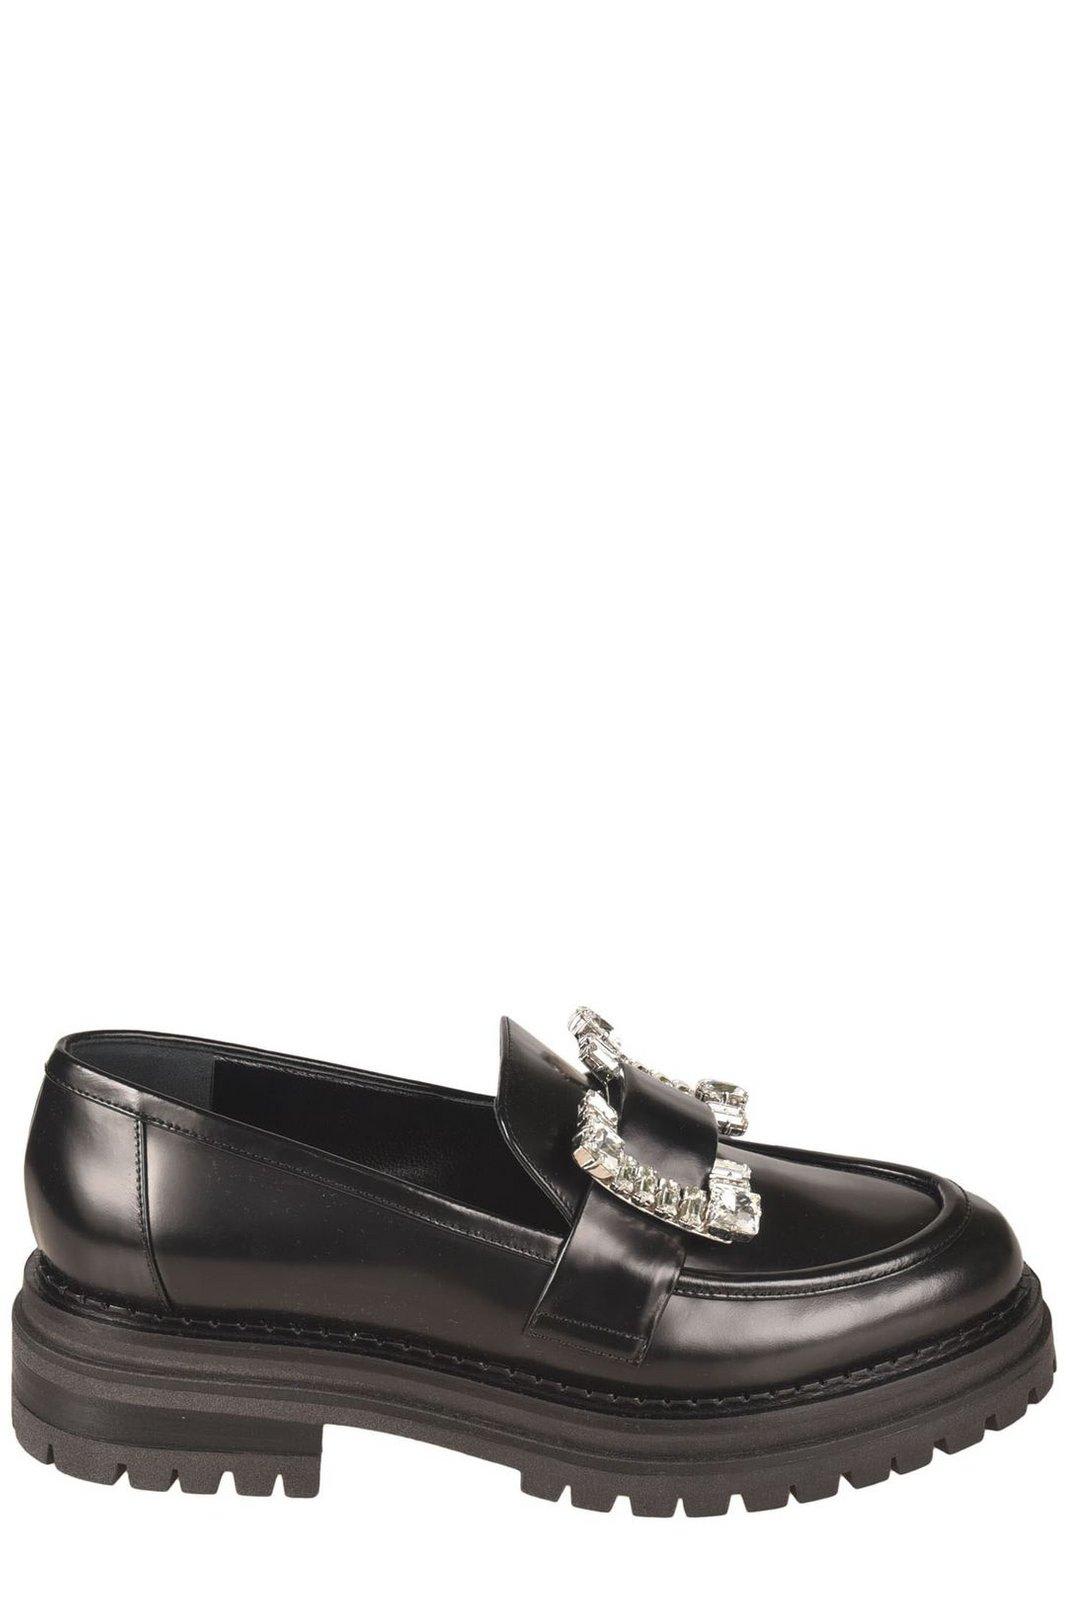 Sergio Rossi Embellished Slip-on Loafers In Nero